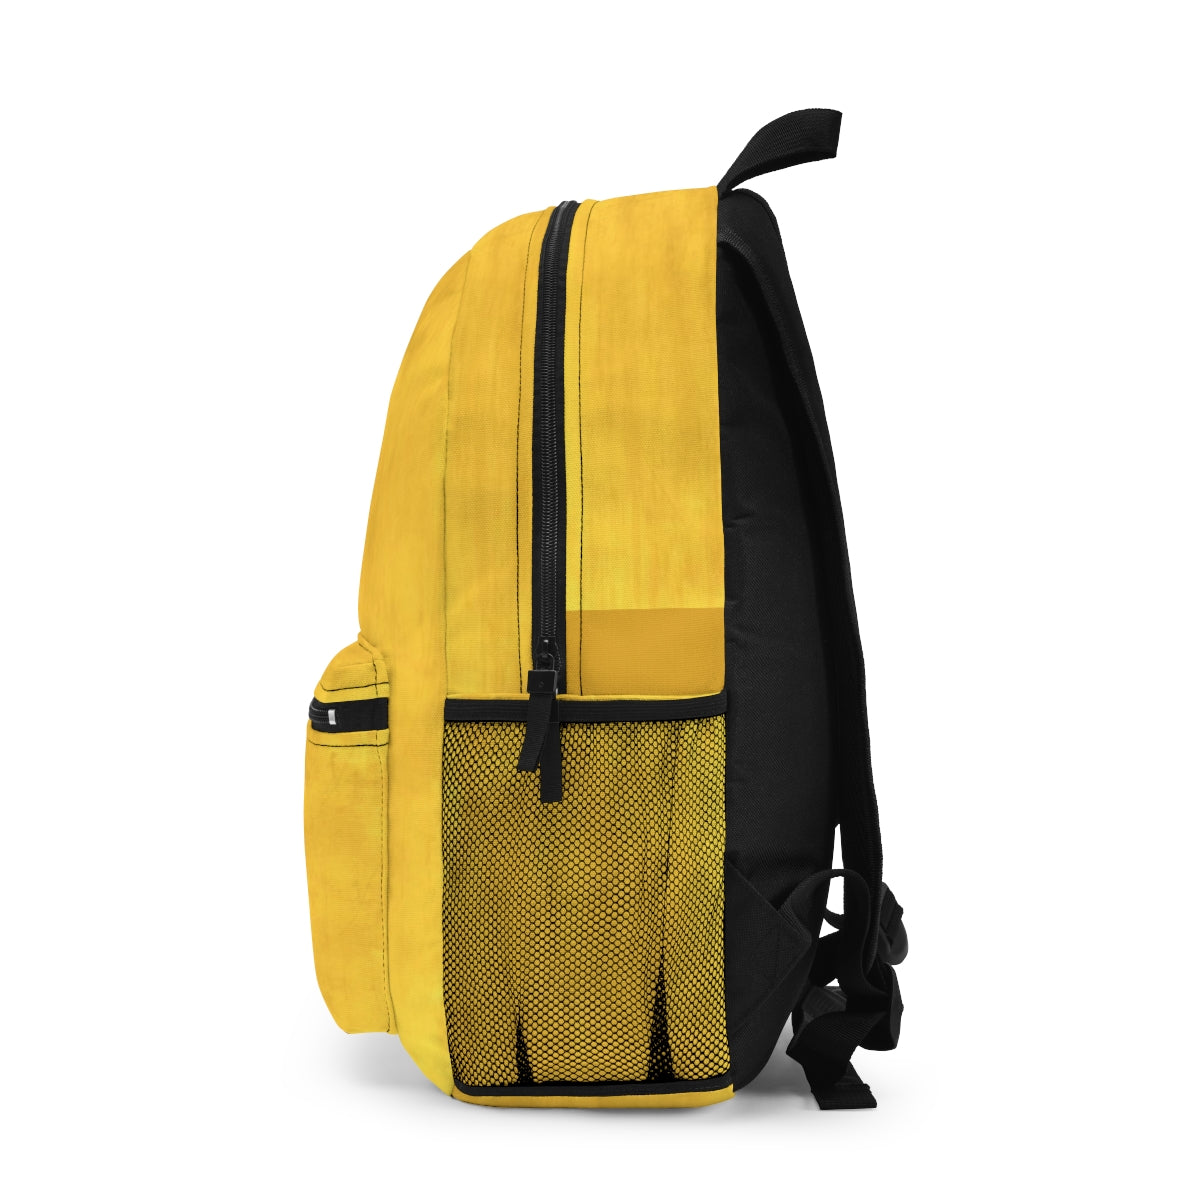 Autumn Yellow Backpack